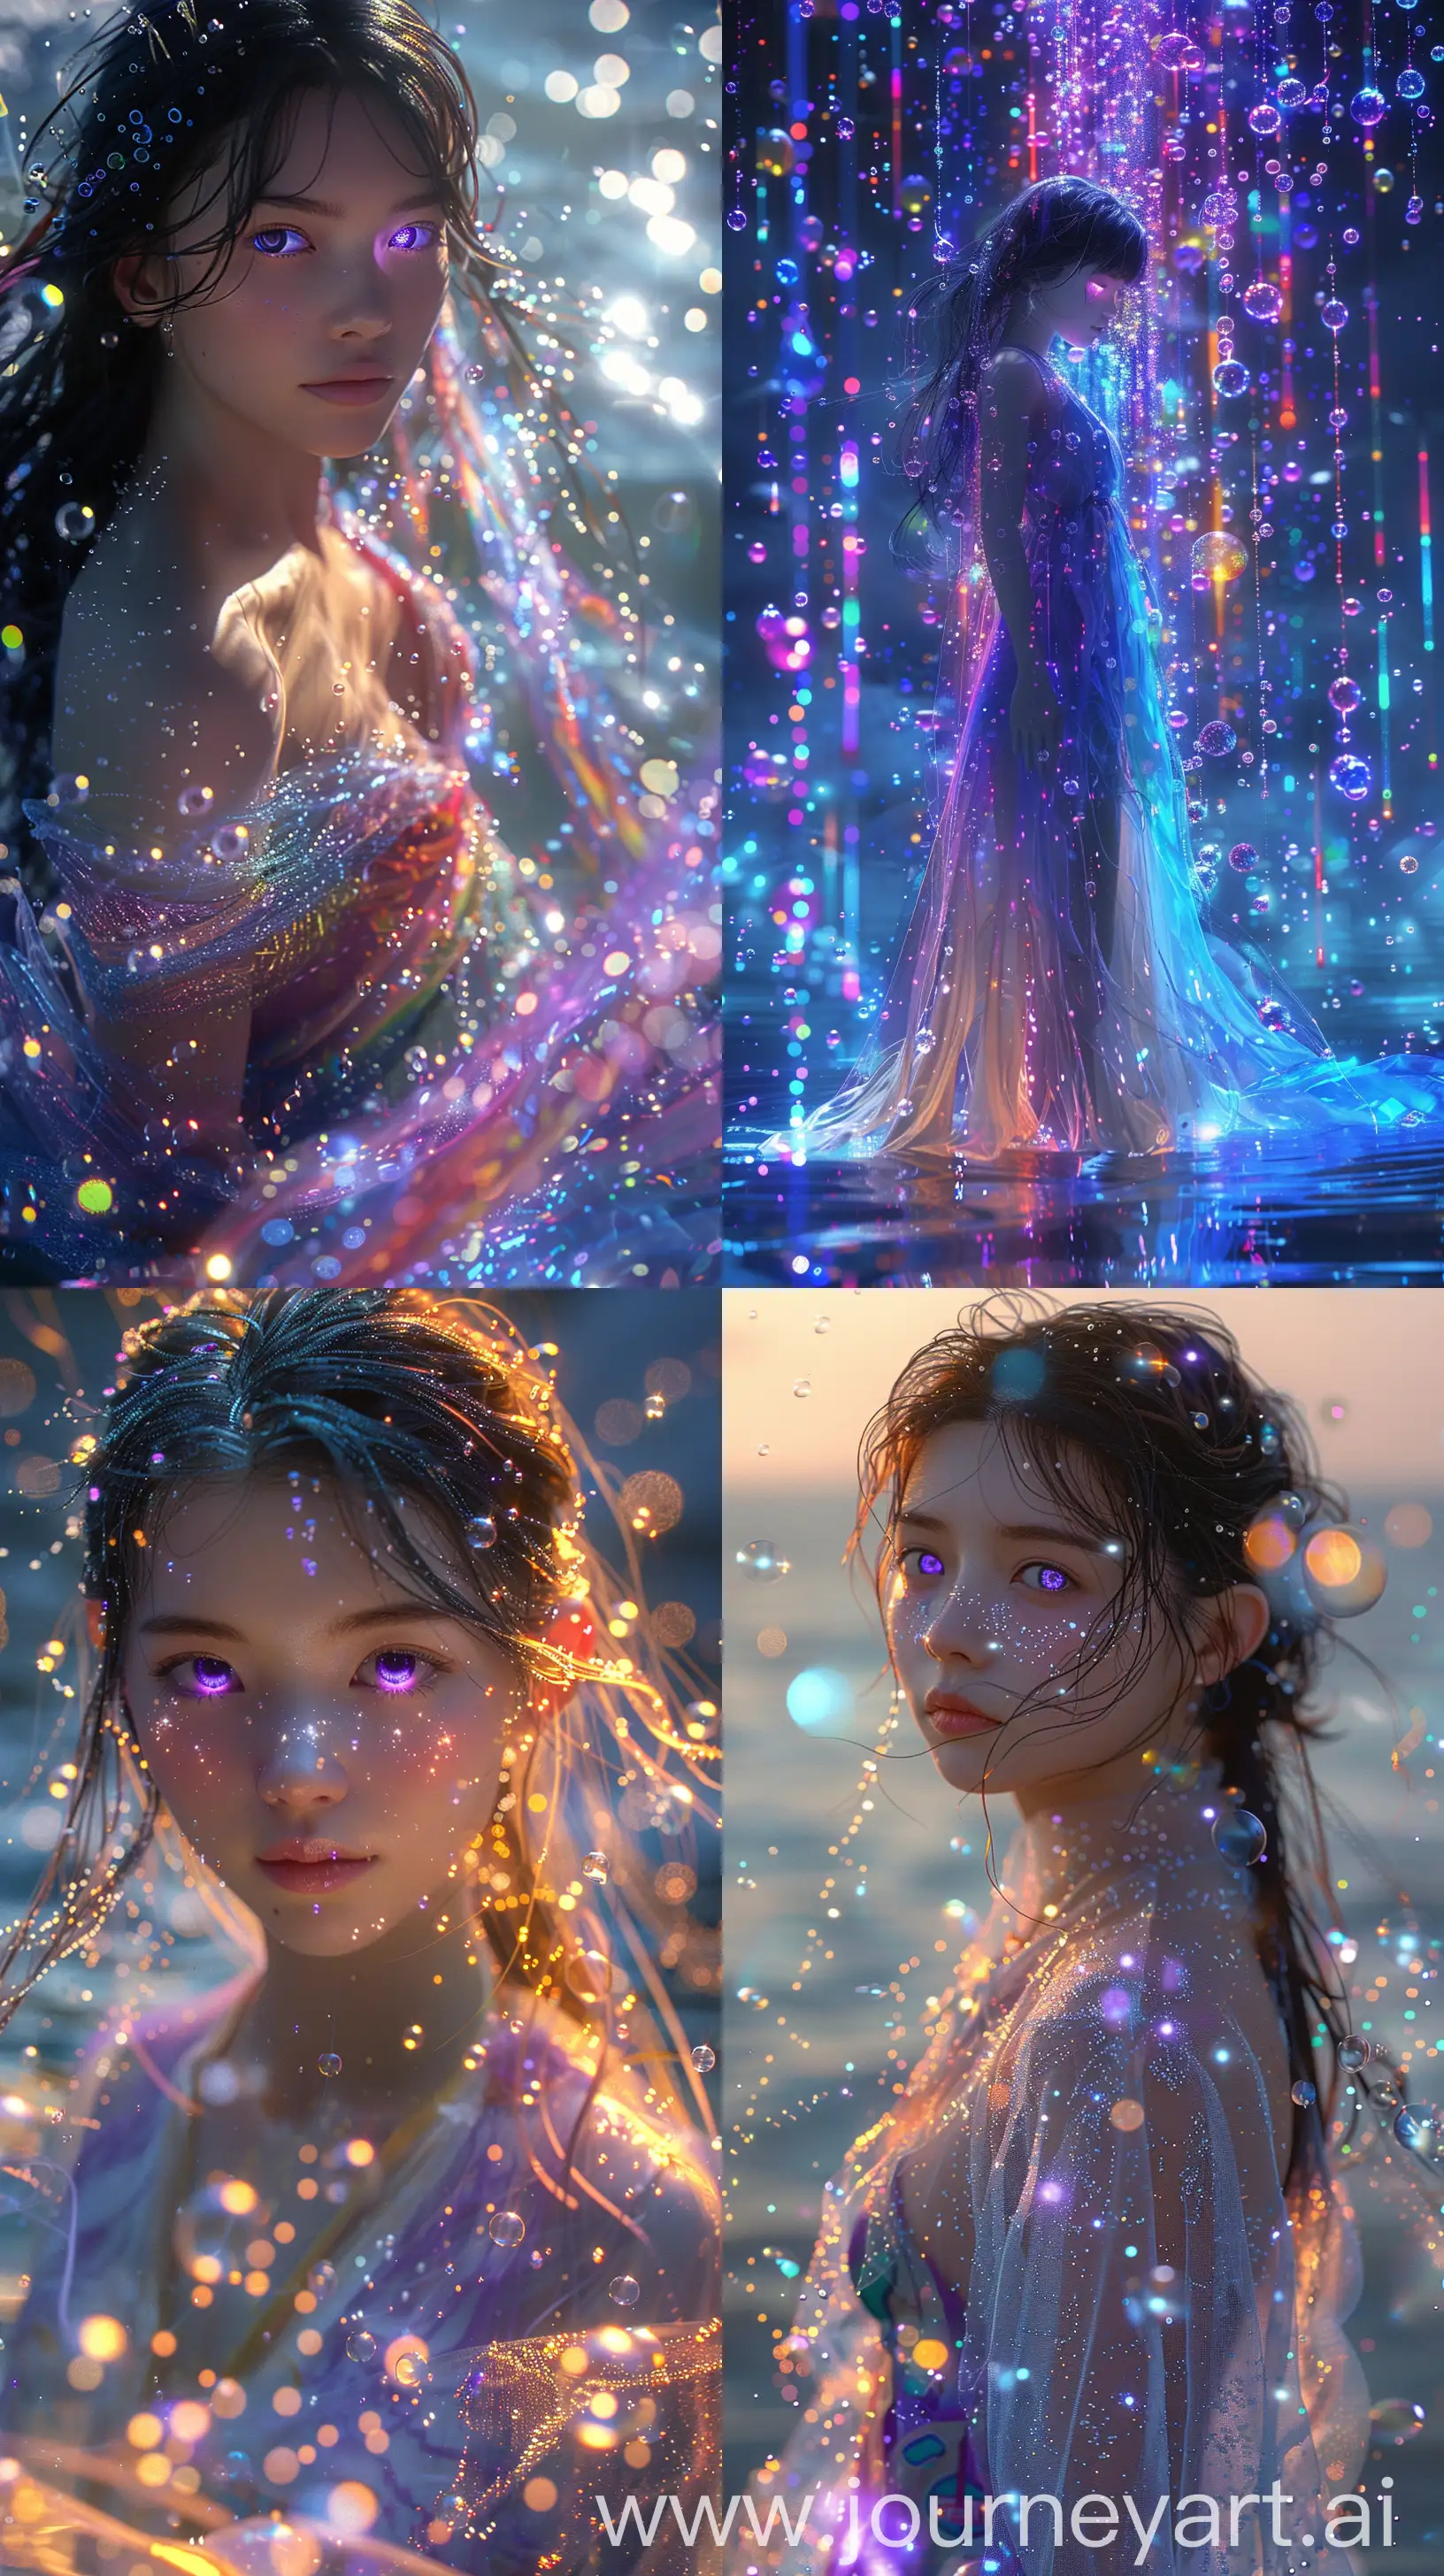 Ethereal-Water-Portrait-Inspired-by-Yanjun-Cheng-Glowing-Threads-and-Magical-Drapery